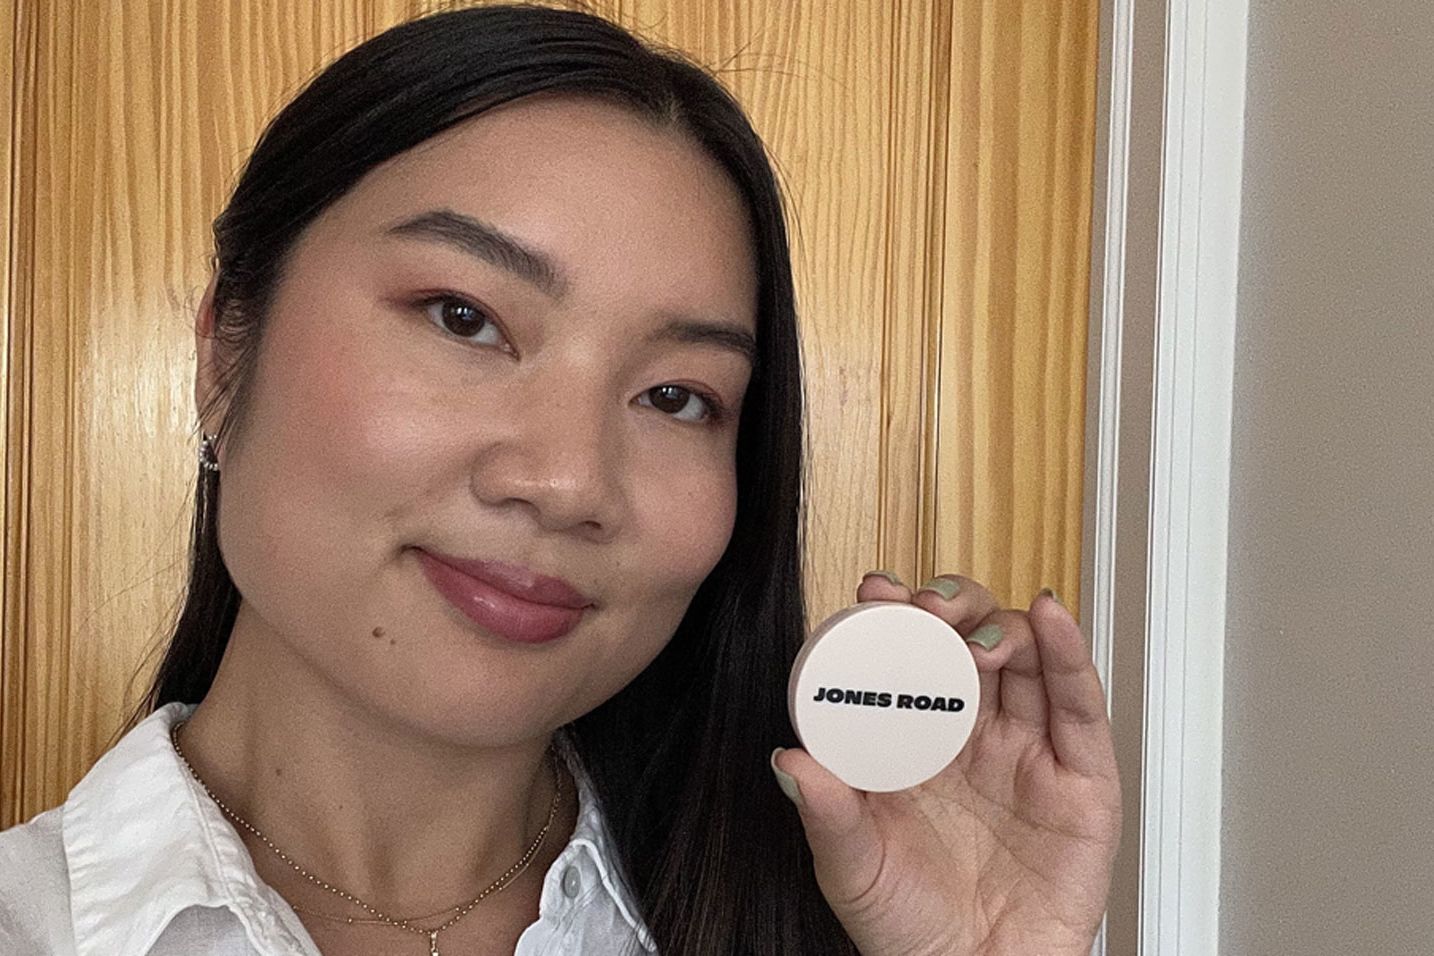 Jones Road makeup review: Clean beauty products by Bobbi Brown | CNN  Underscored